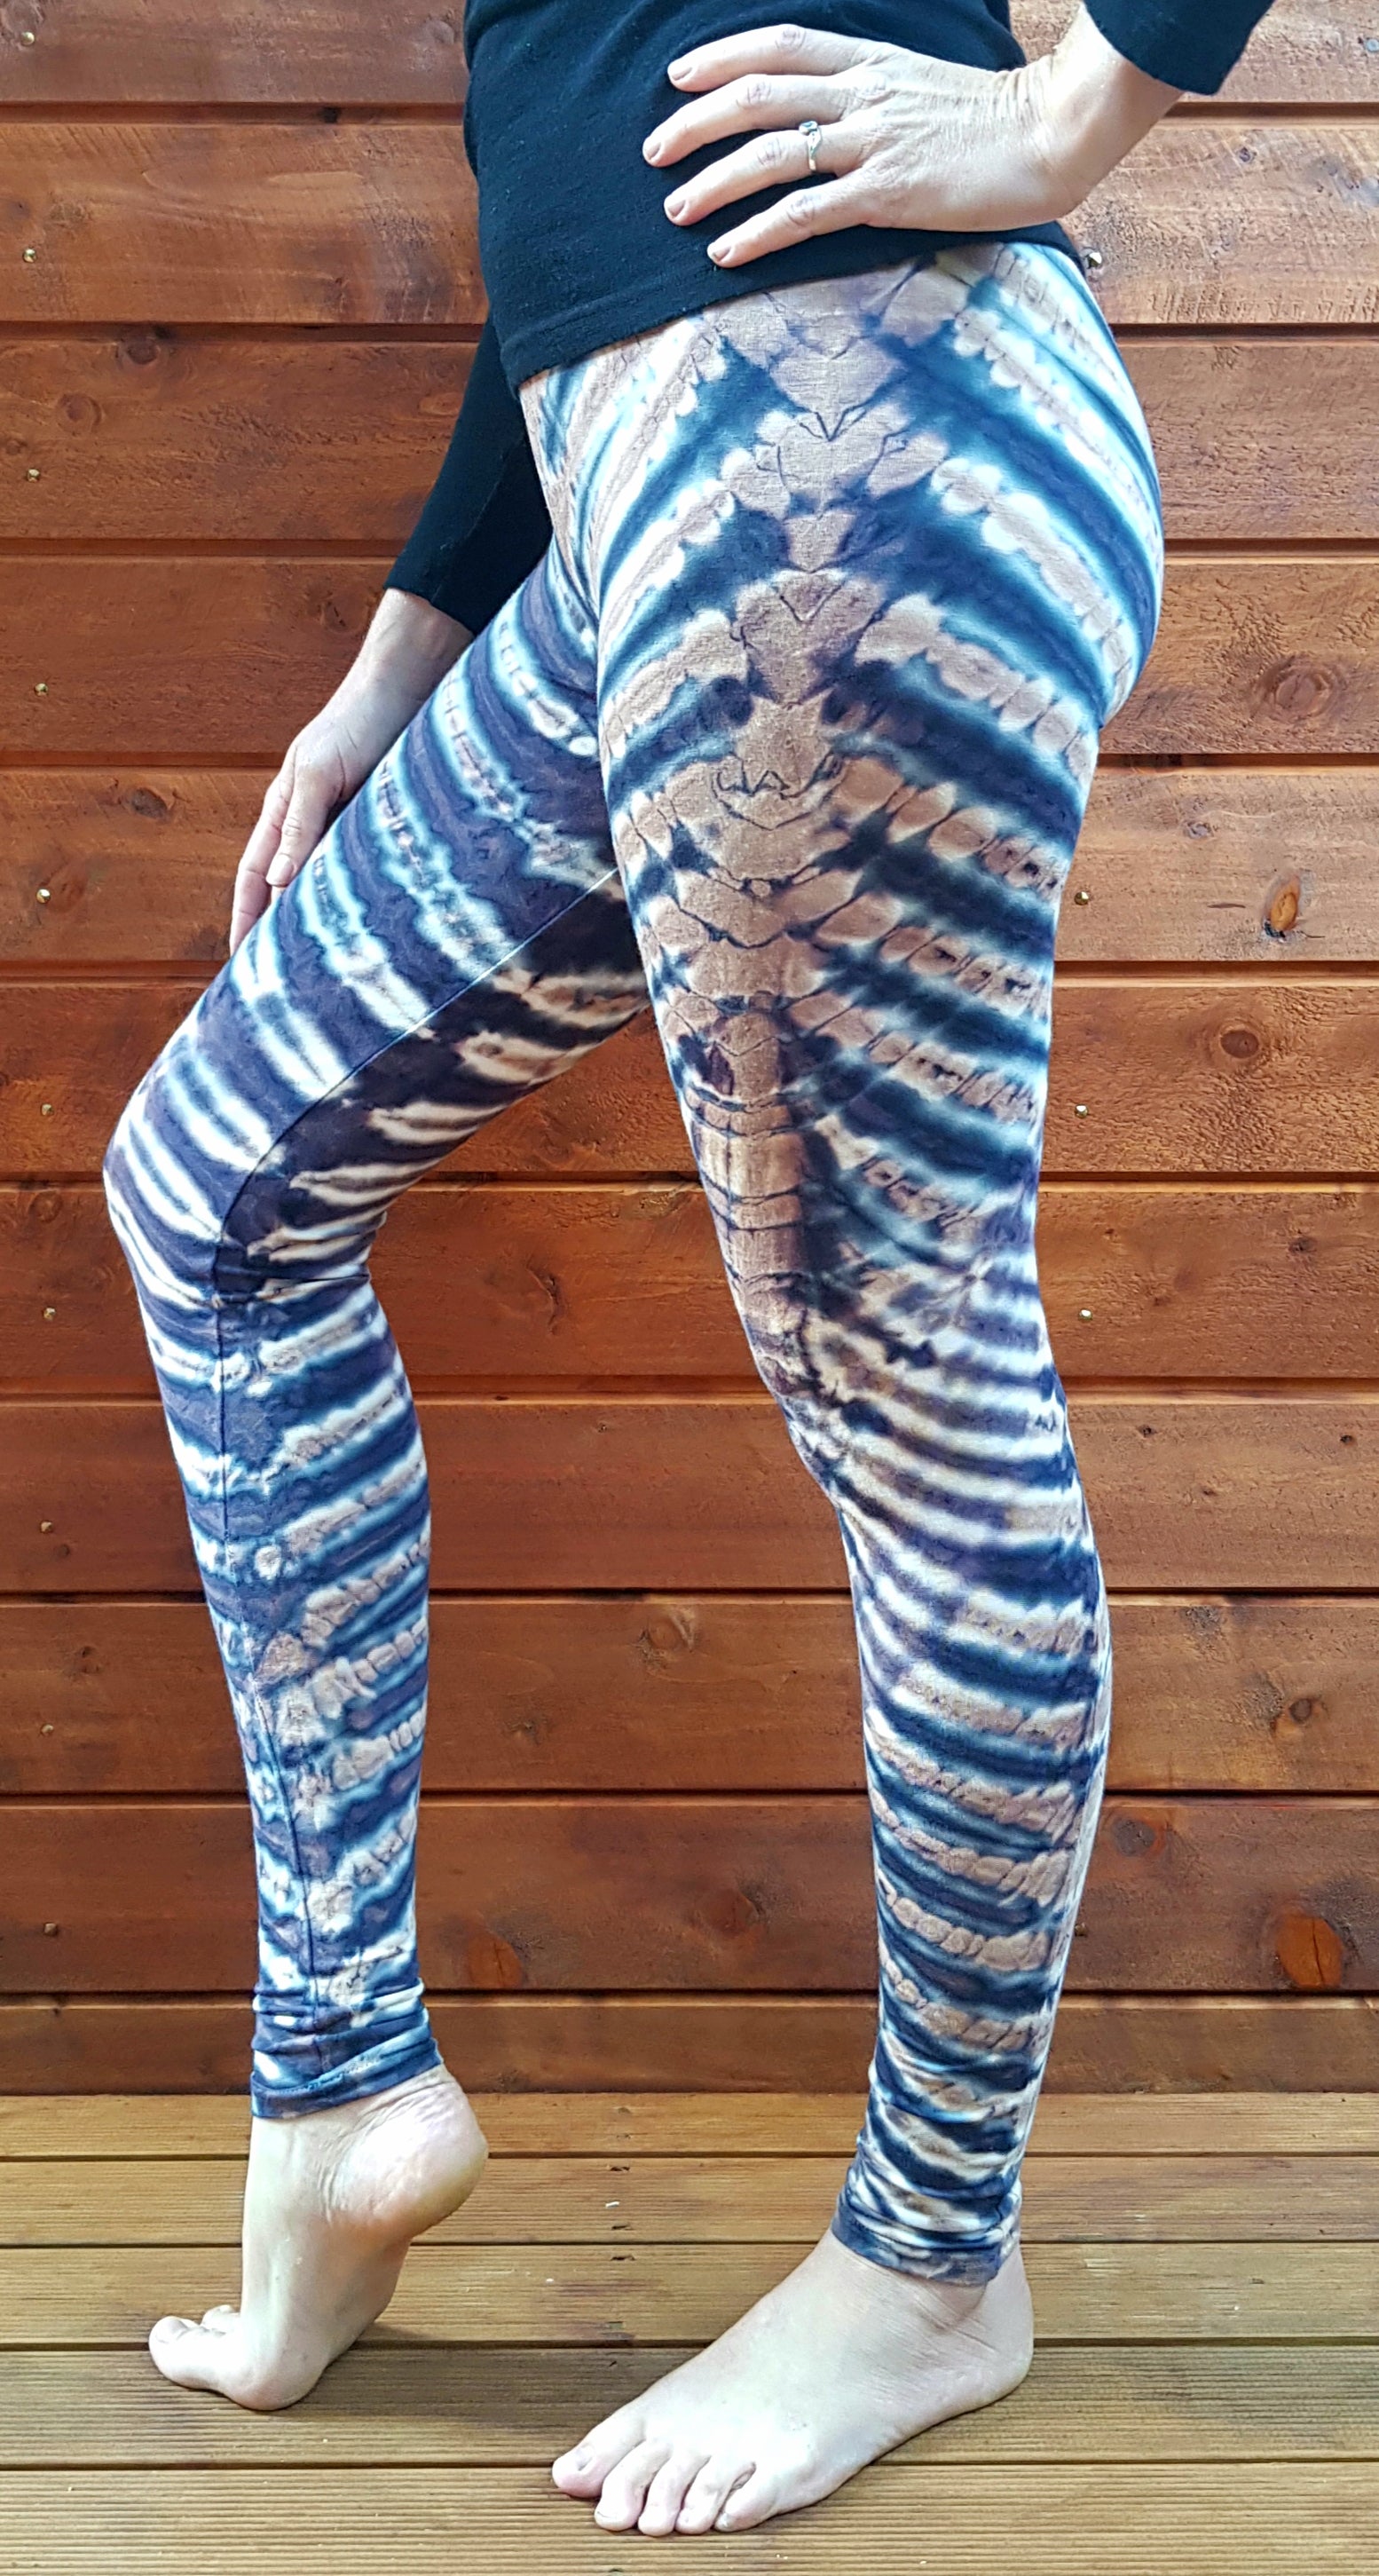 Tights (earthy stripes)